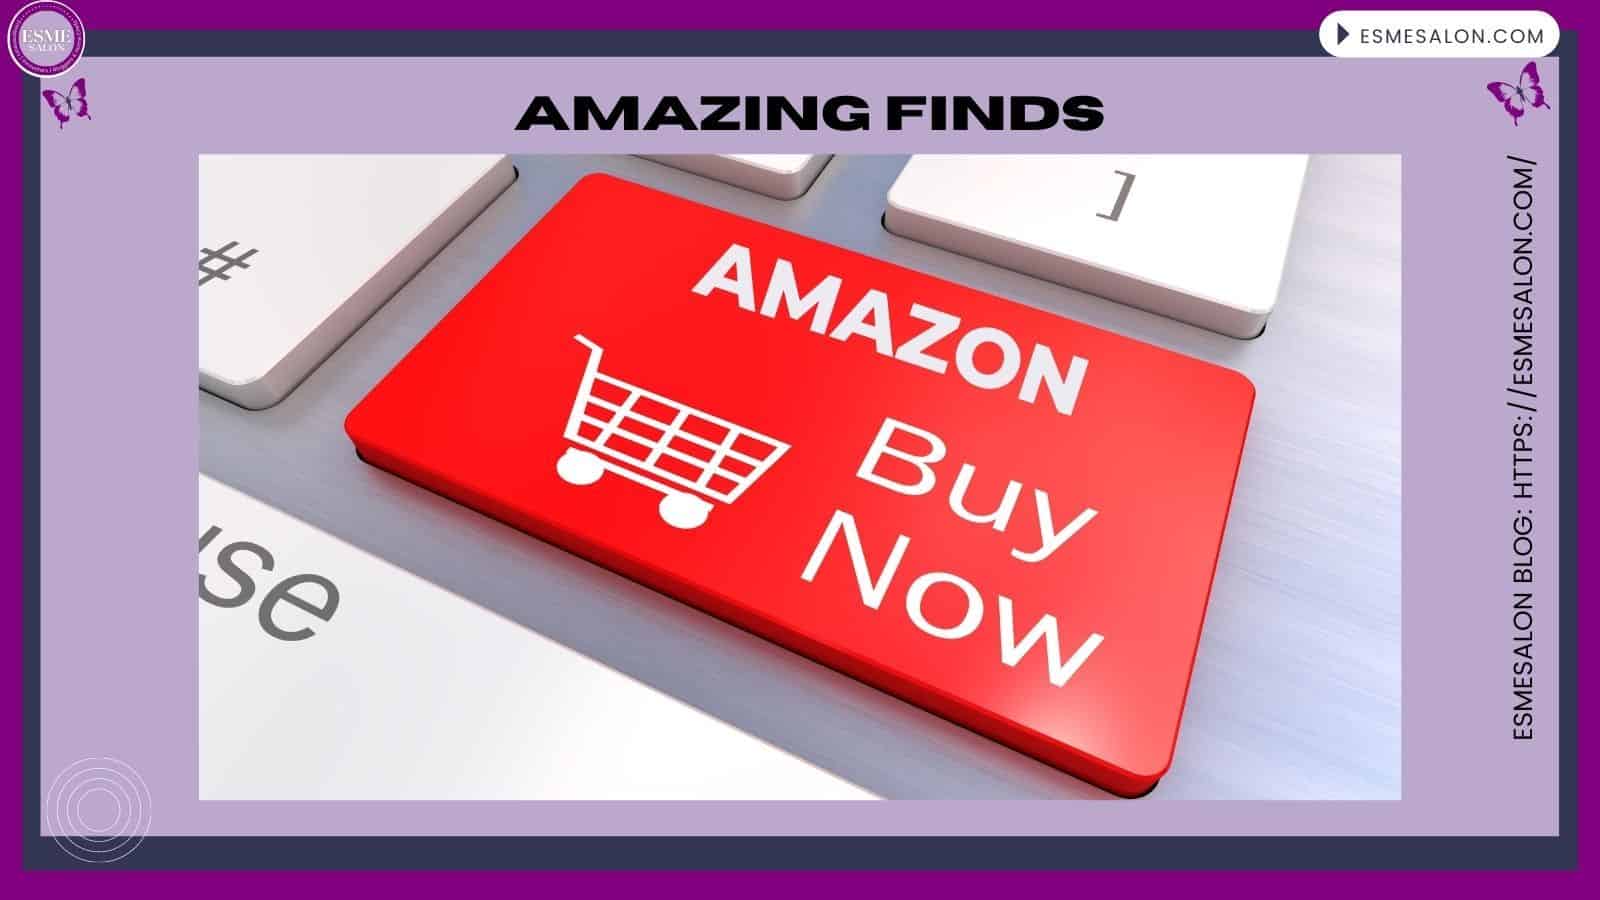 an image of a buy now button for Amazon Amazing Finds